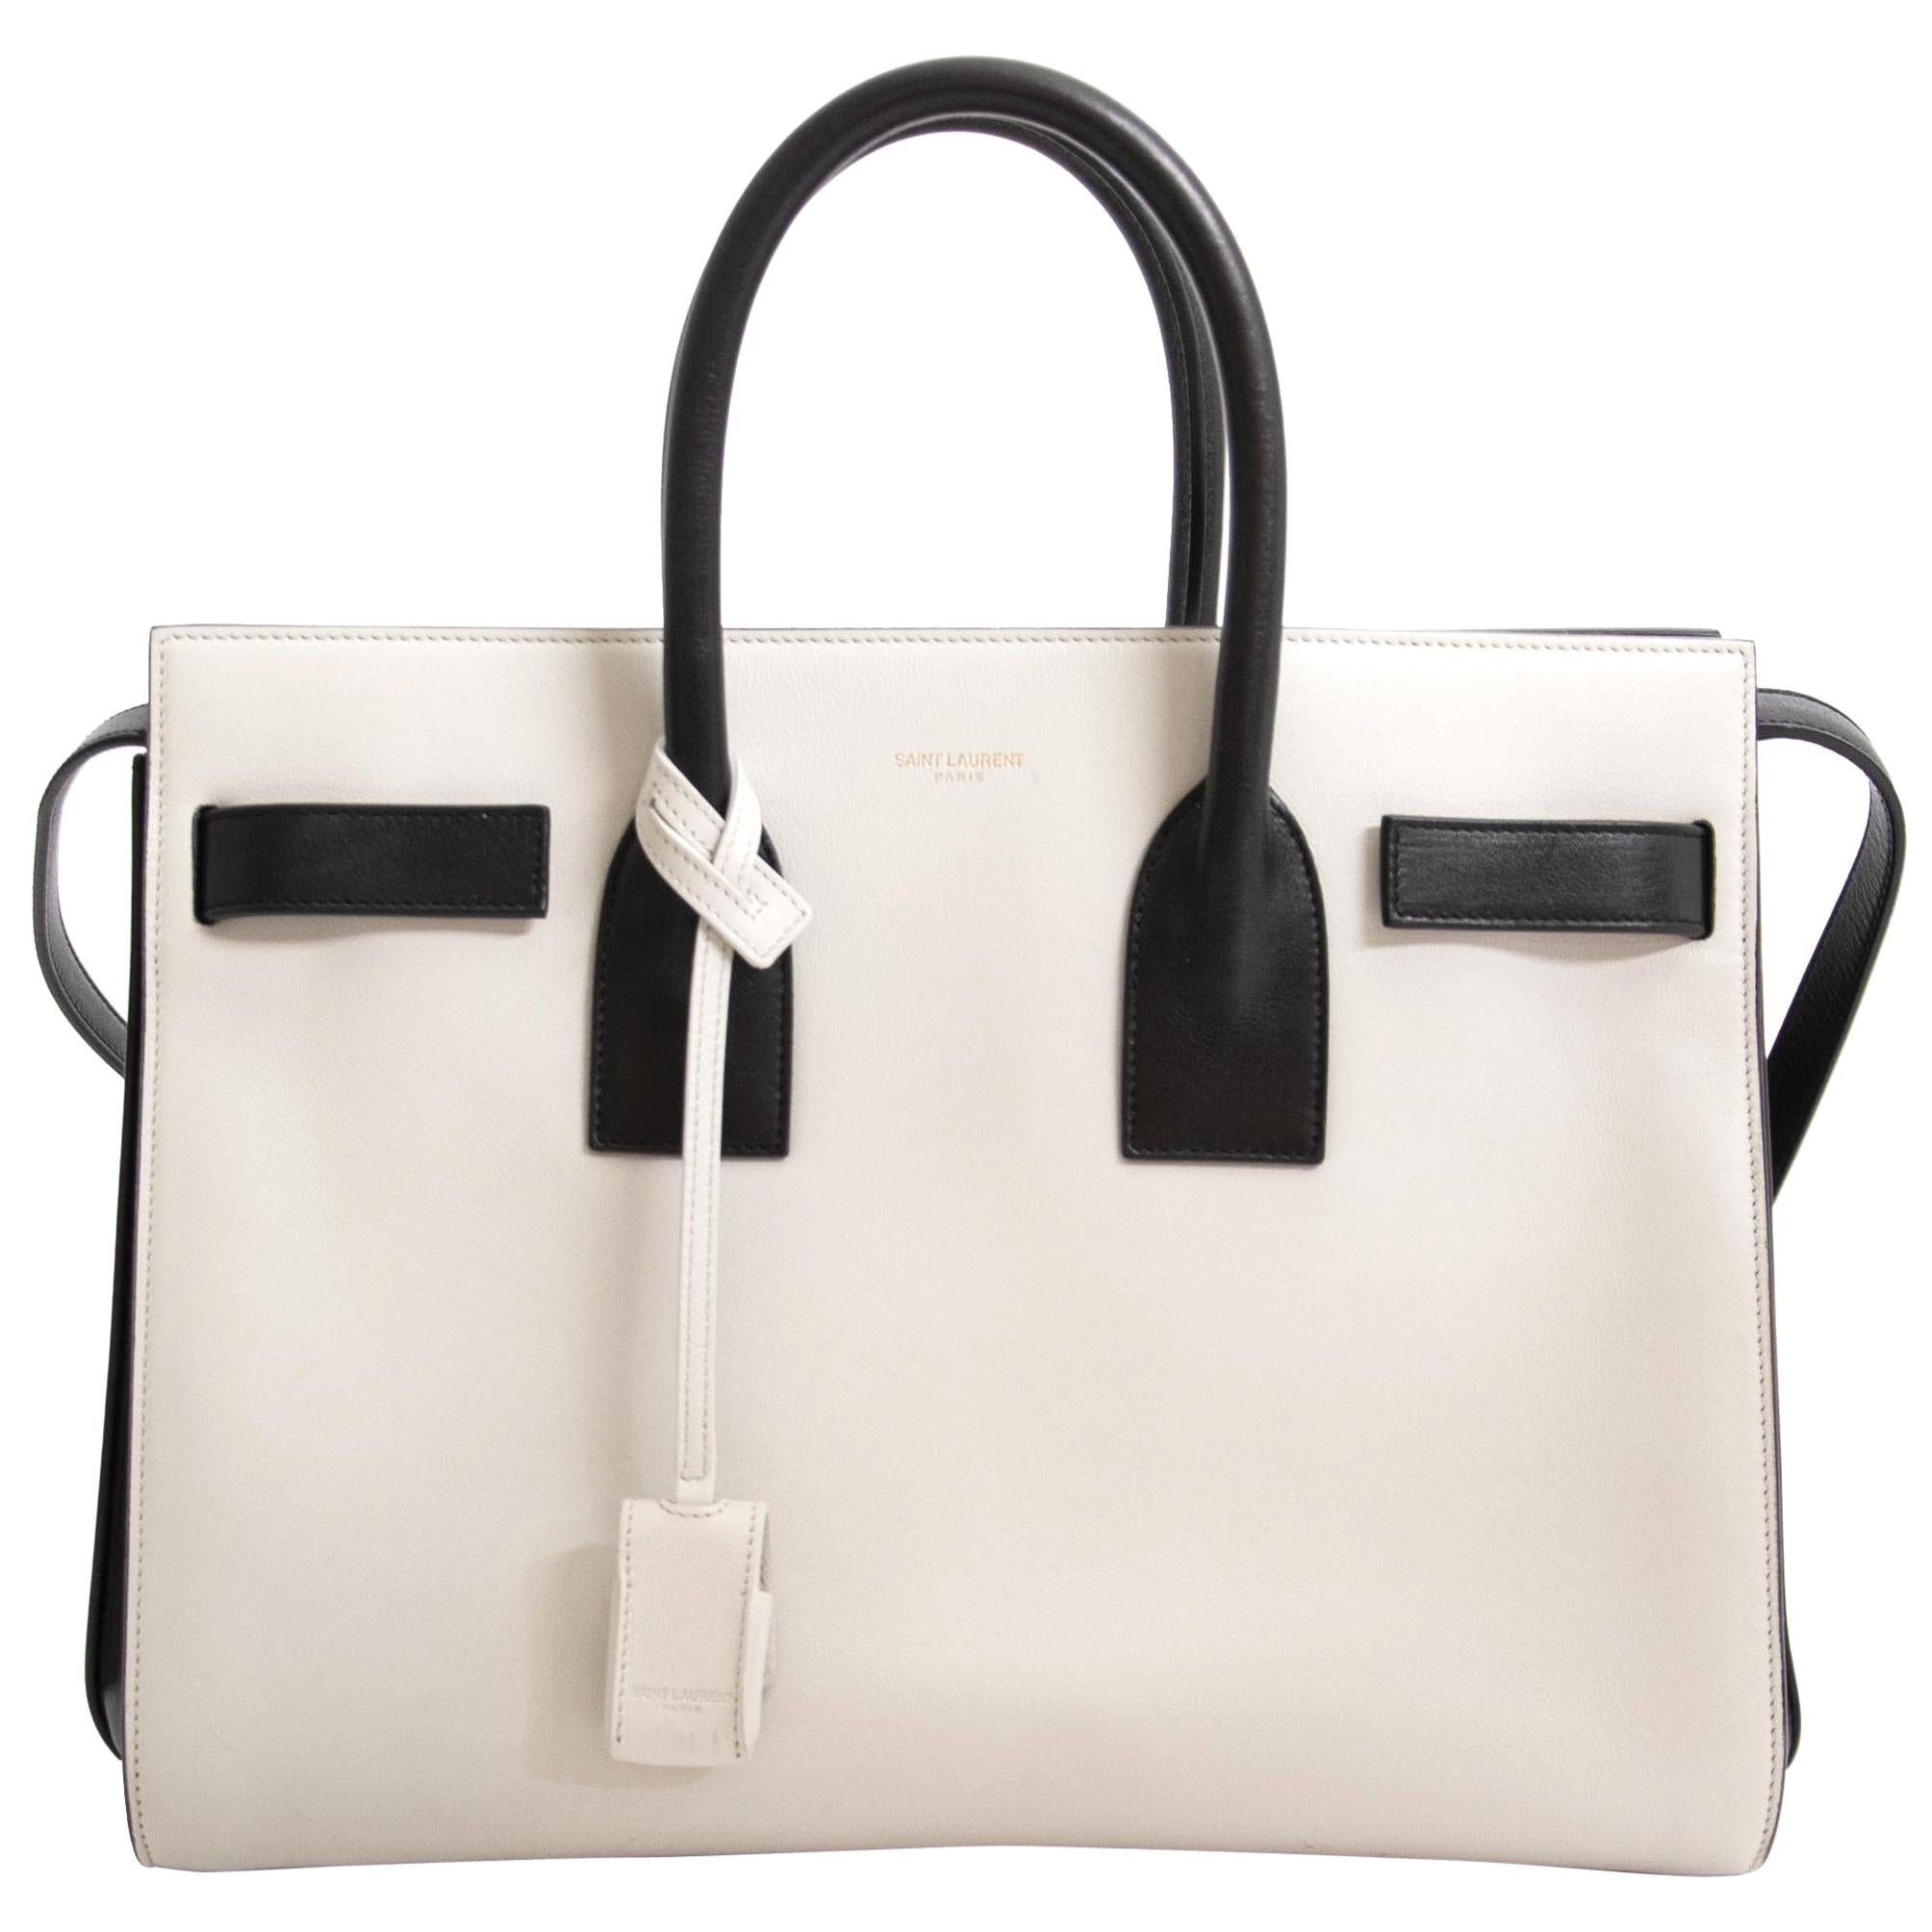 Excellent condition

Saint Laurent Small Bicolor Black/White Sac De Jour

The amazing Sac De Jour from Saint Laurent is crafted in premium leather, of smooth calfskin and comes in black and white. 
There's a foil Saint Laurent logo at center front.